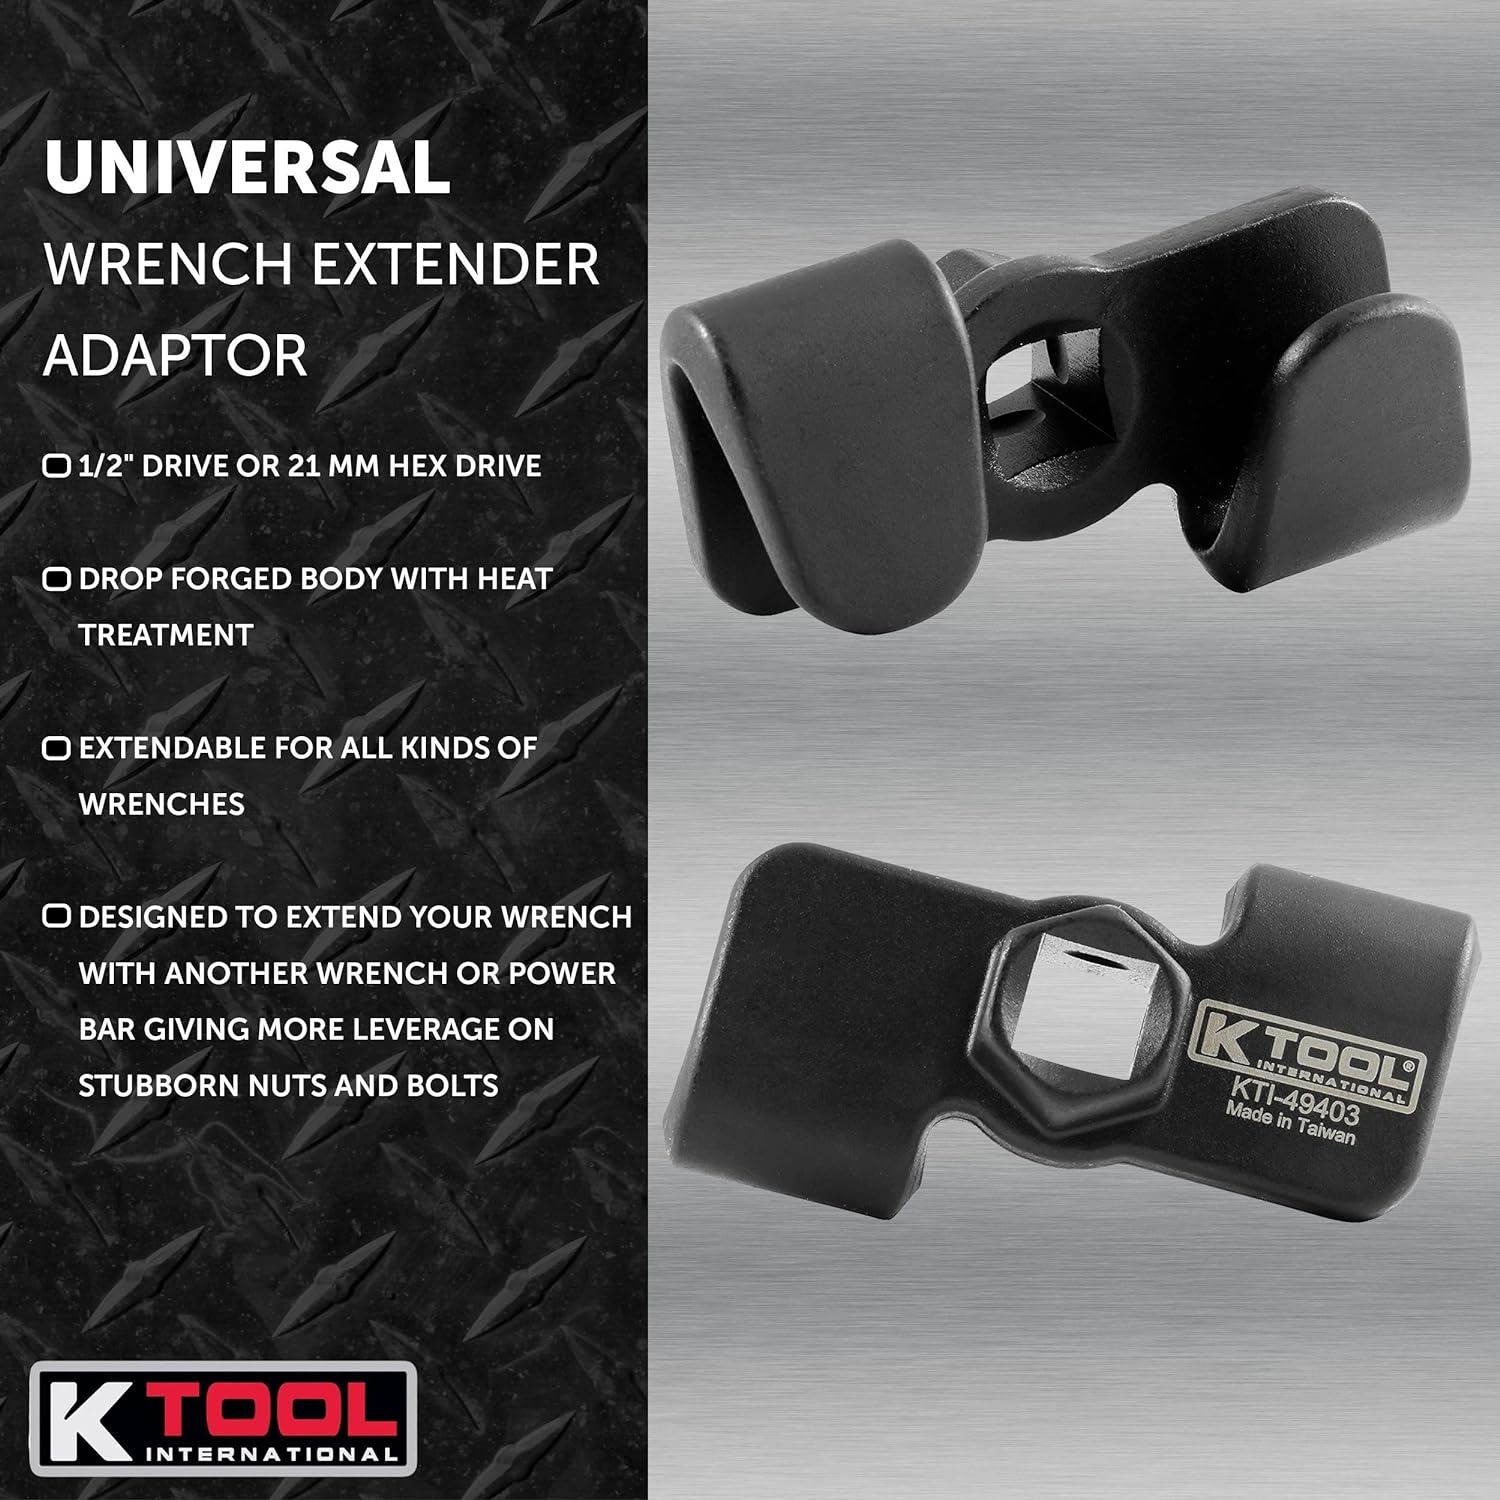 K Tool International Universal Wrench Extender Adaptor; 1/2 Inch Drive, Drop Forged Body w/Heat Treatment, Extendable for More Leverage on Stubborn